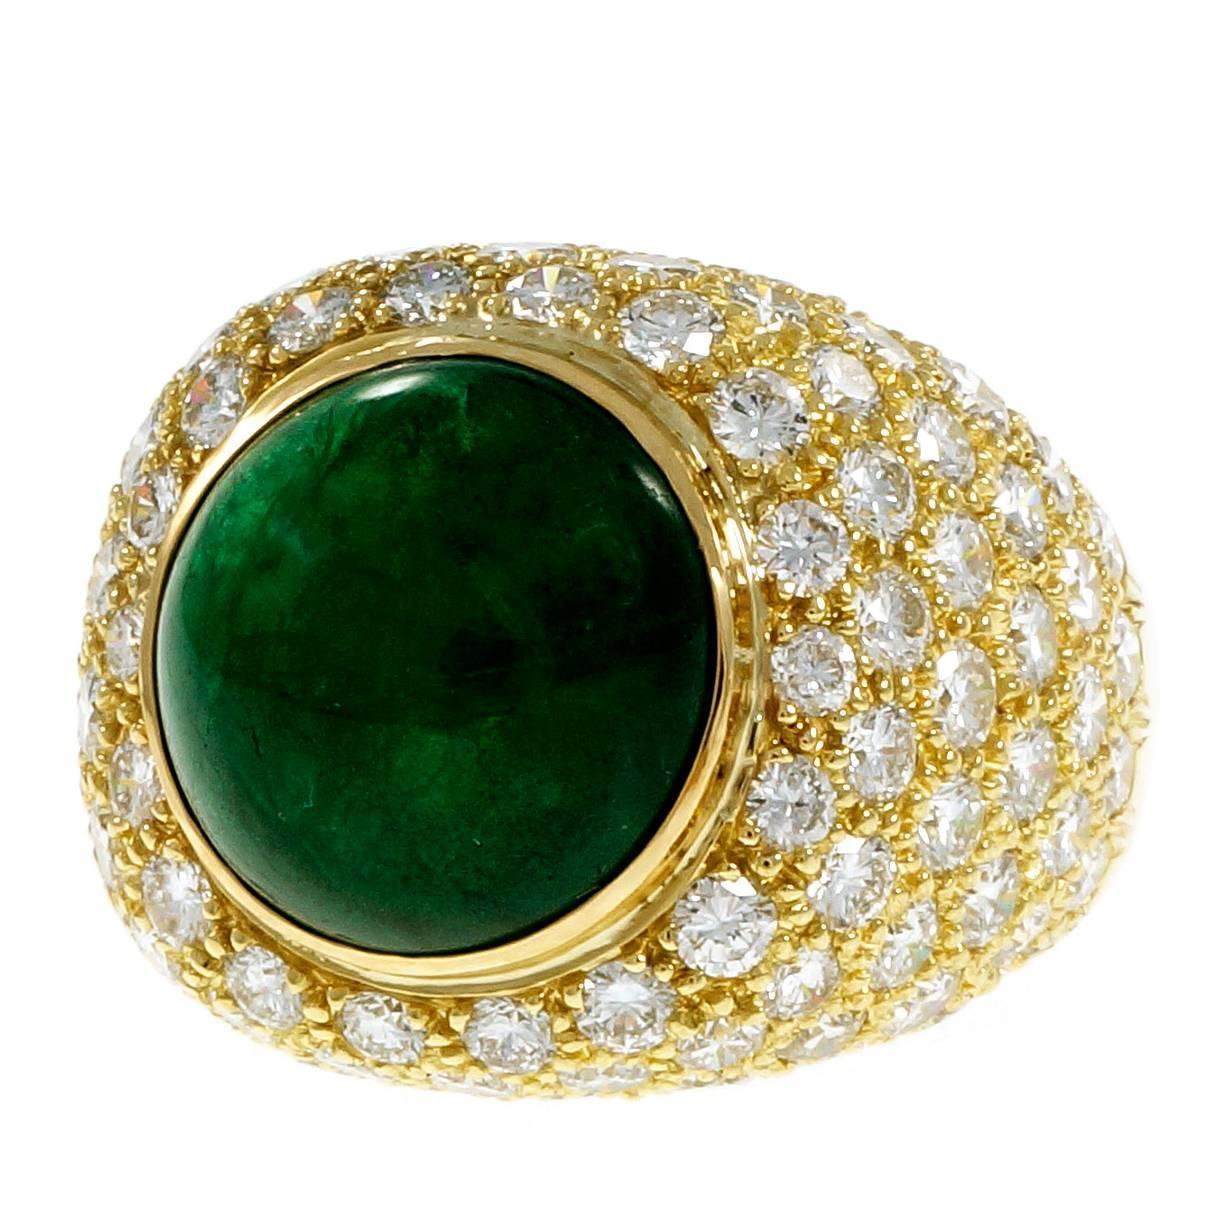 Green Cabochon Emerald Diamond Dome Gold Cocktail Ring For Sale at 1stdibs